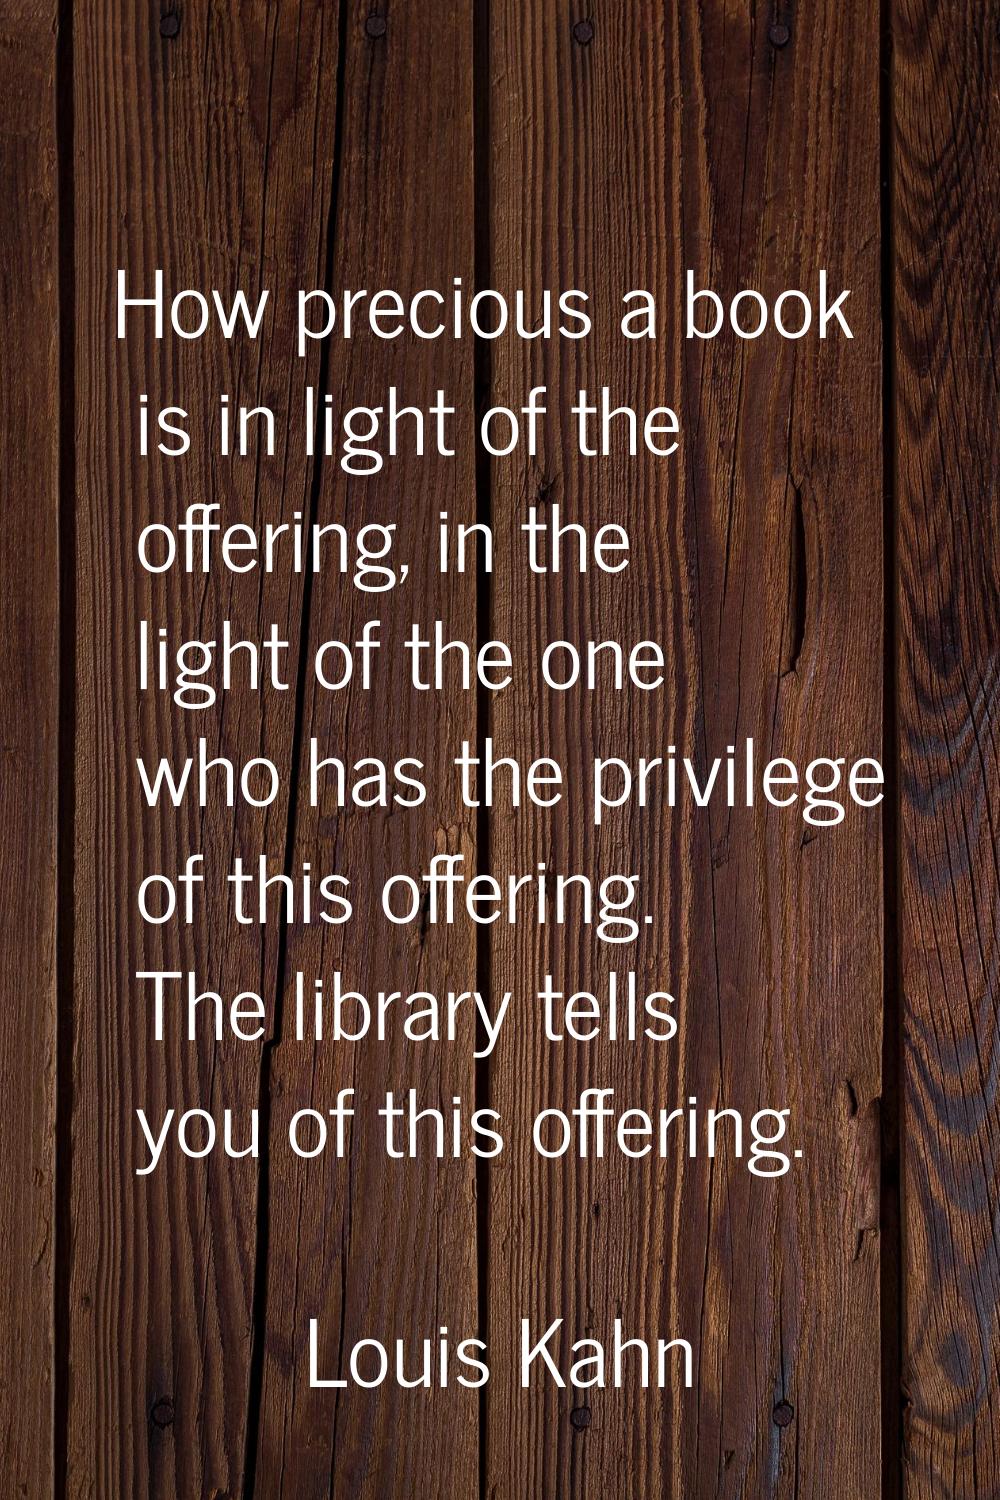 How precious a book is in light of the offering, in the light of the one who has the privilege of t